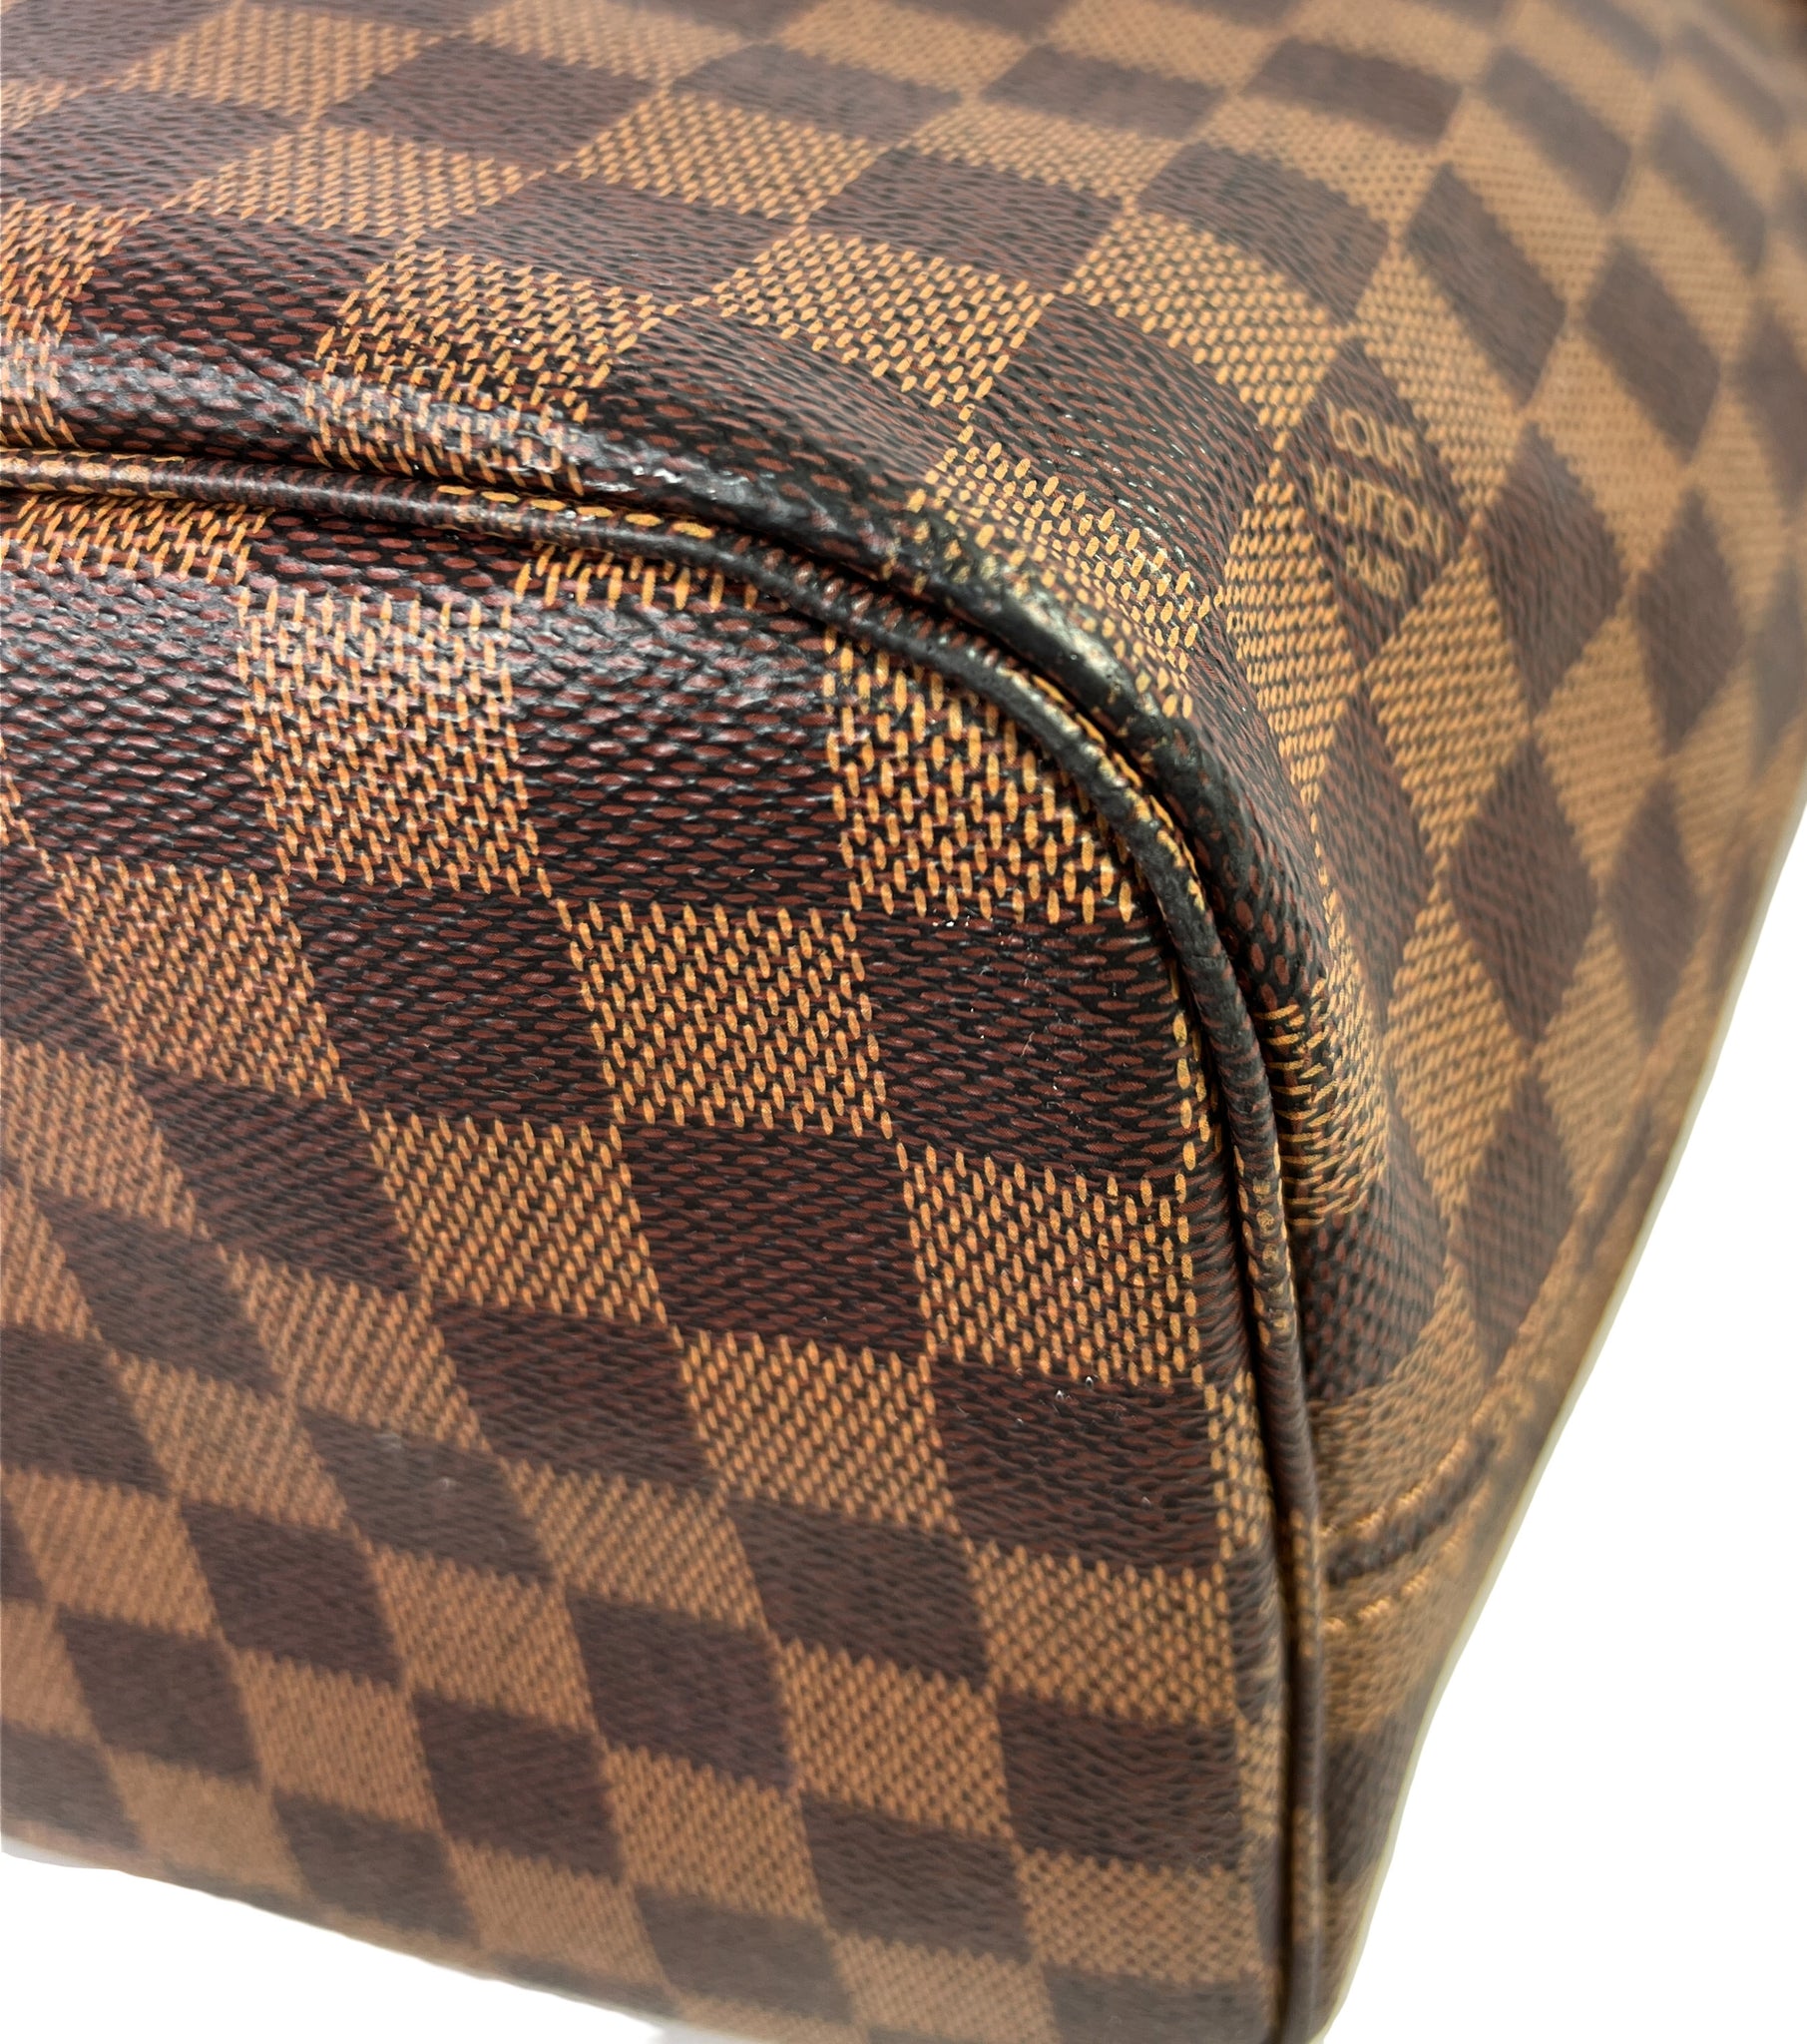 Louis Vuitton Cherry Damier Ebene Neverfull MM at the best price